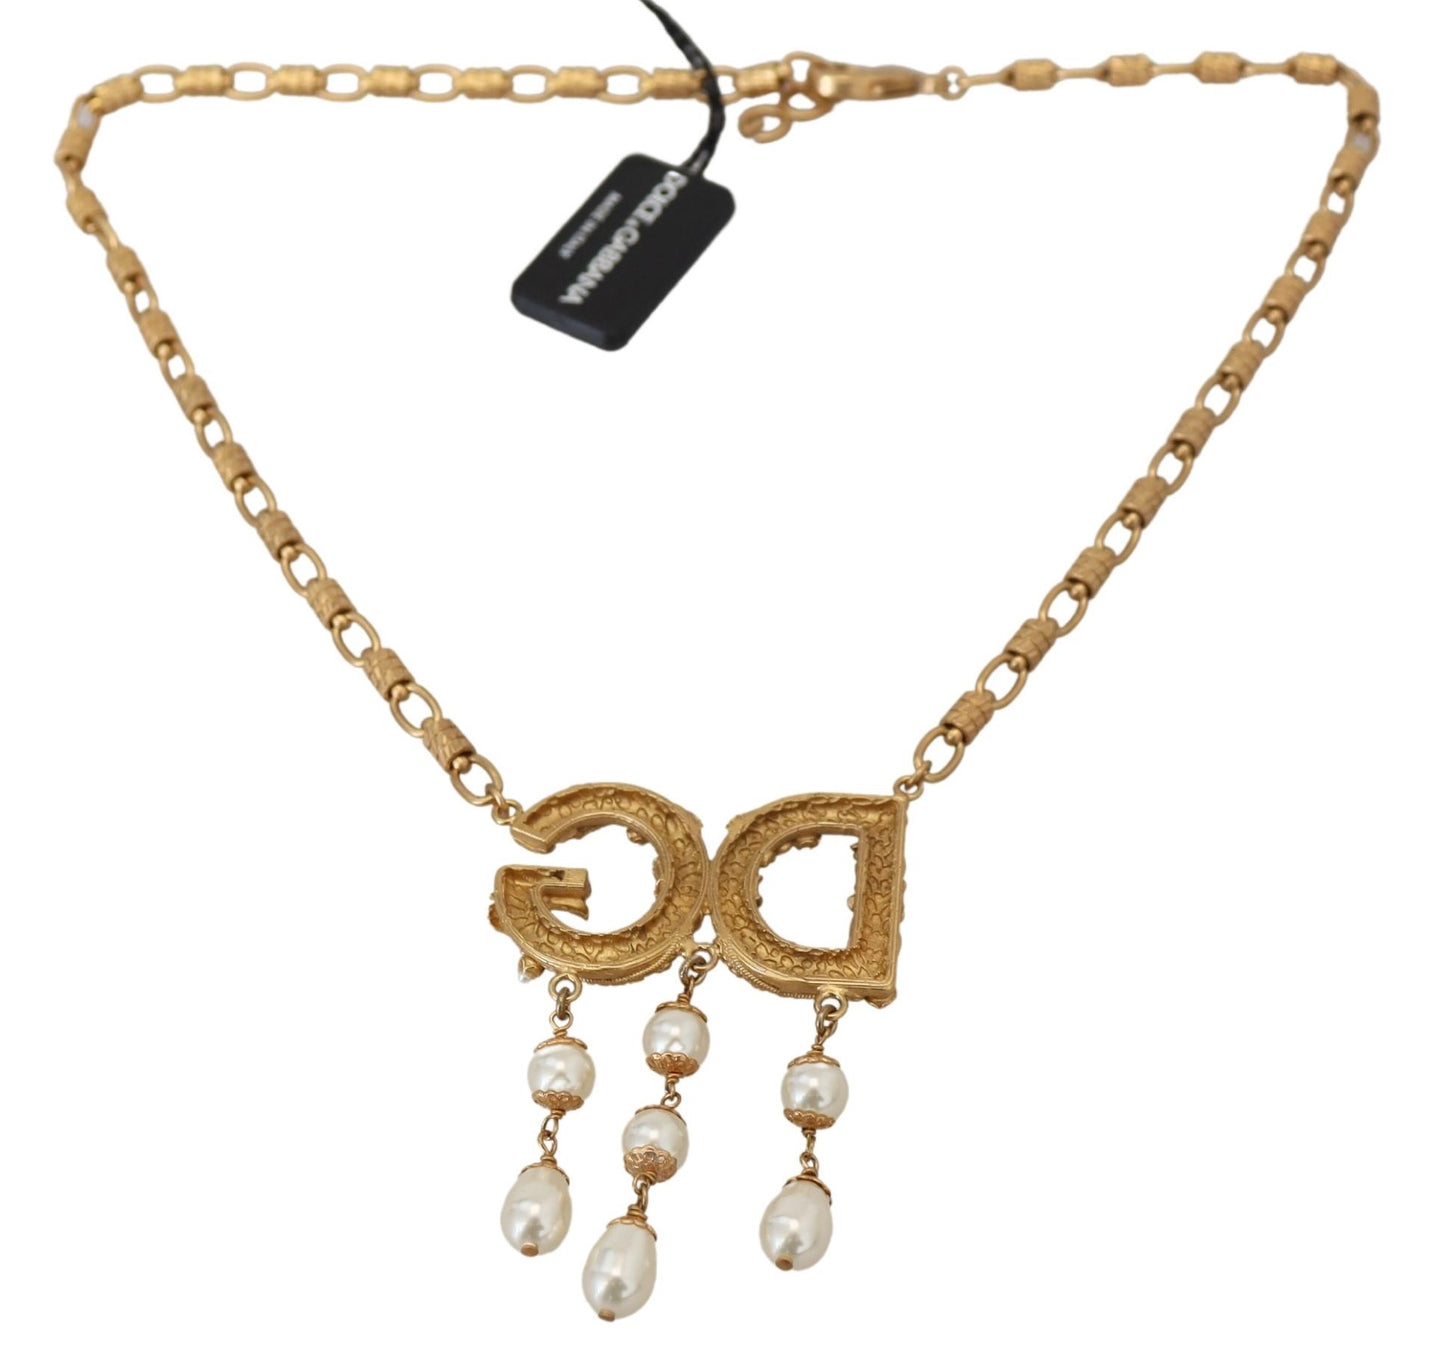 Glimmering Gold Crystal Statement Necklace